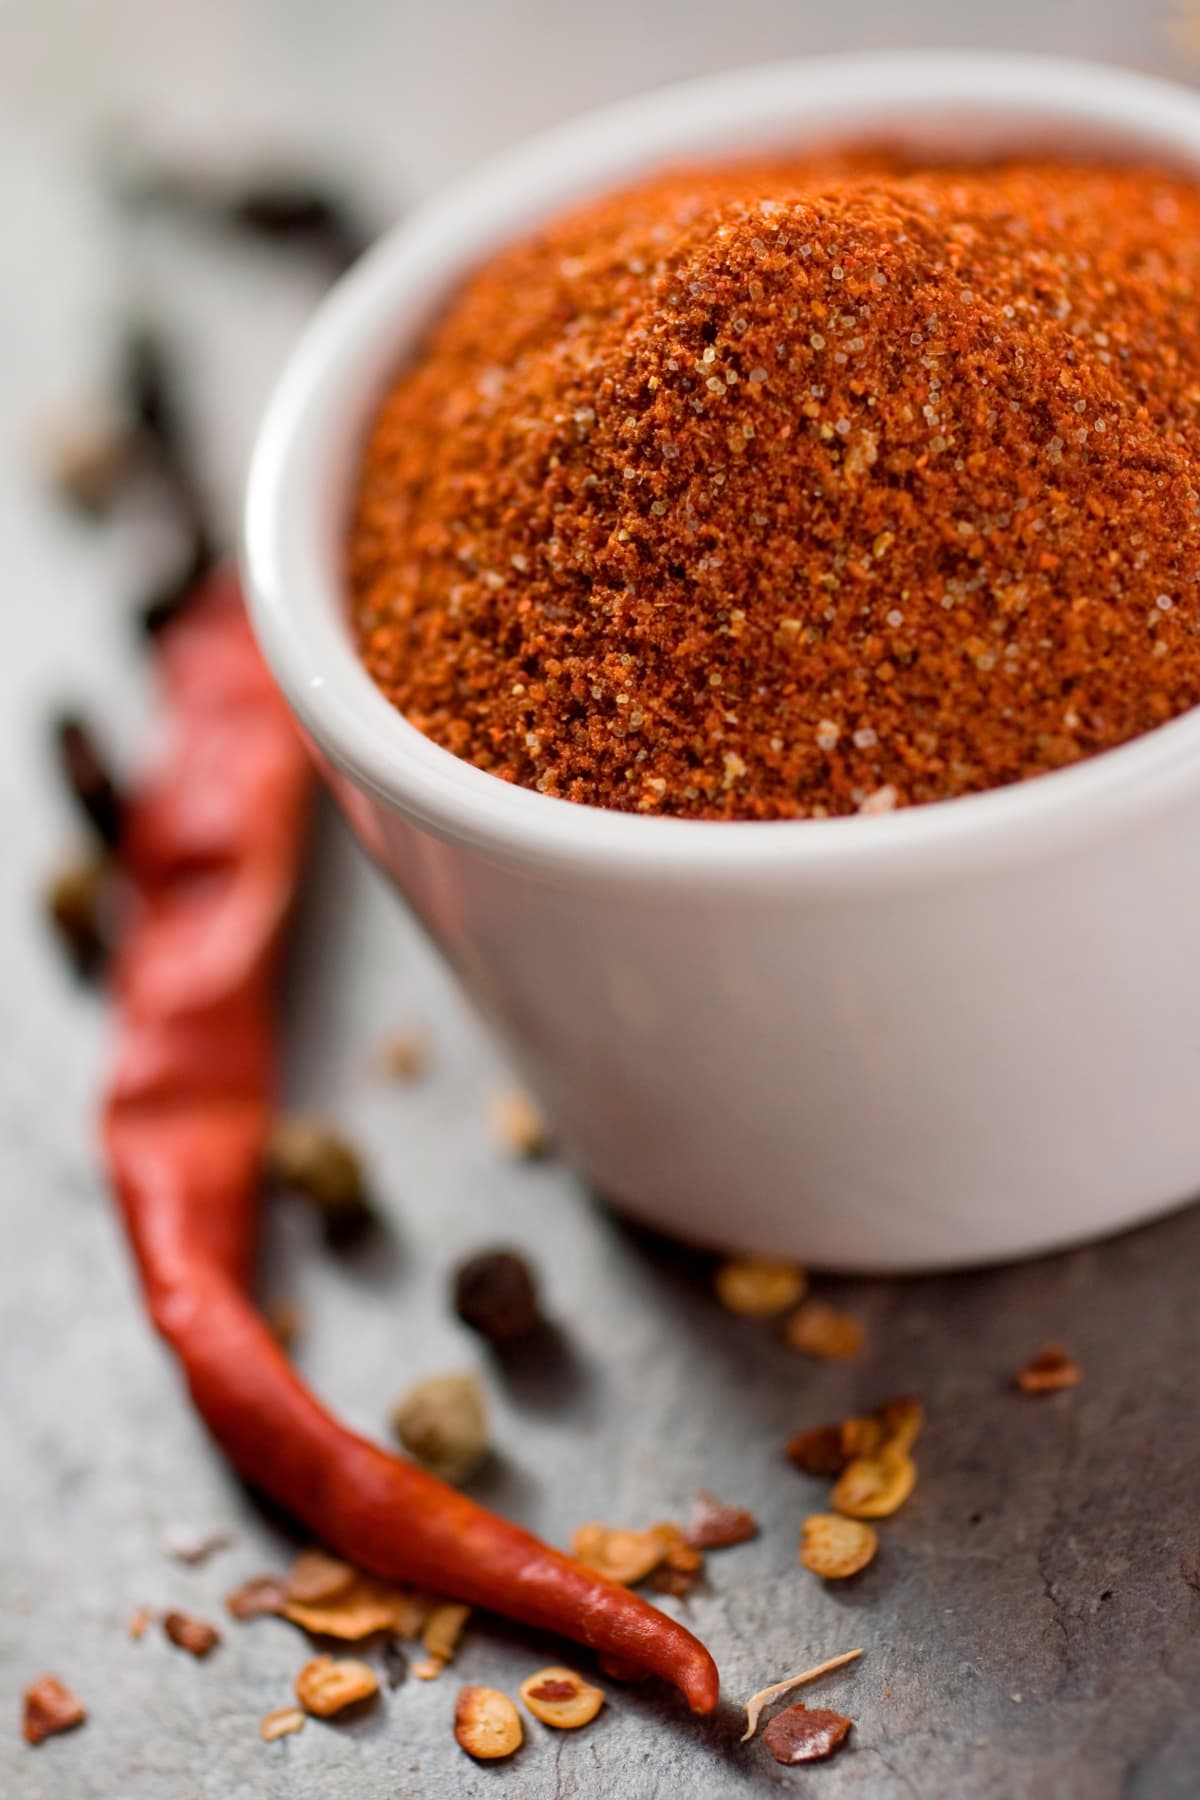 "Handmade spice rub.  Made from smoky dried anaheims, red chilies, white pepper, dry smoked sugar and a few other delicious ingredients.  You can rub it on dry or use it as an ingredient for a zesty marinade.  Shallow dof."